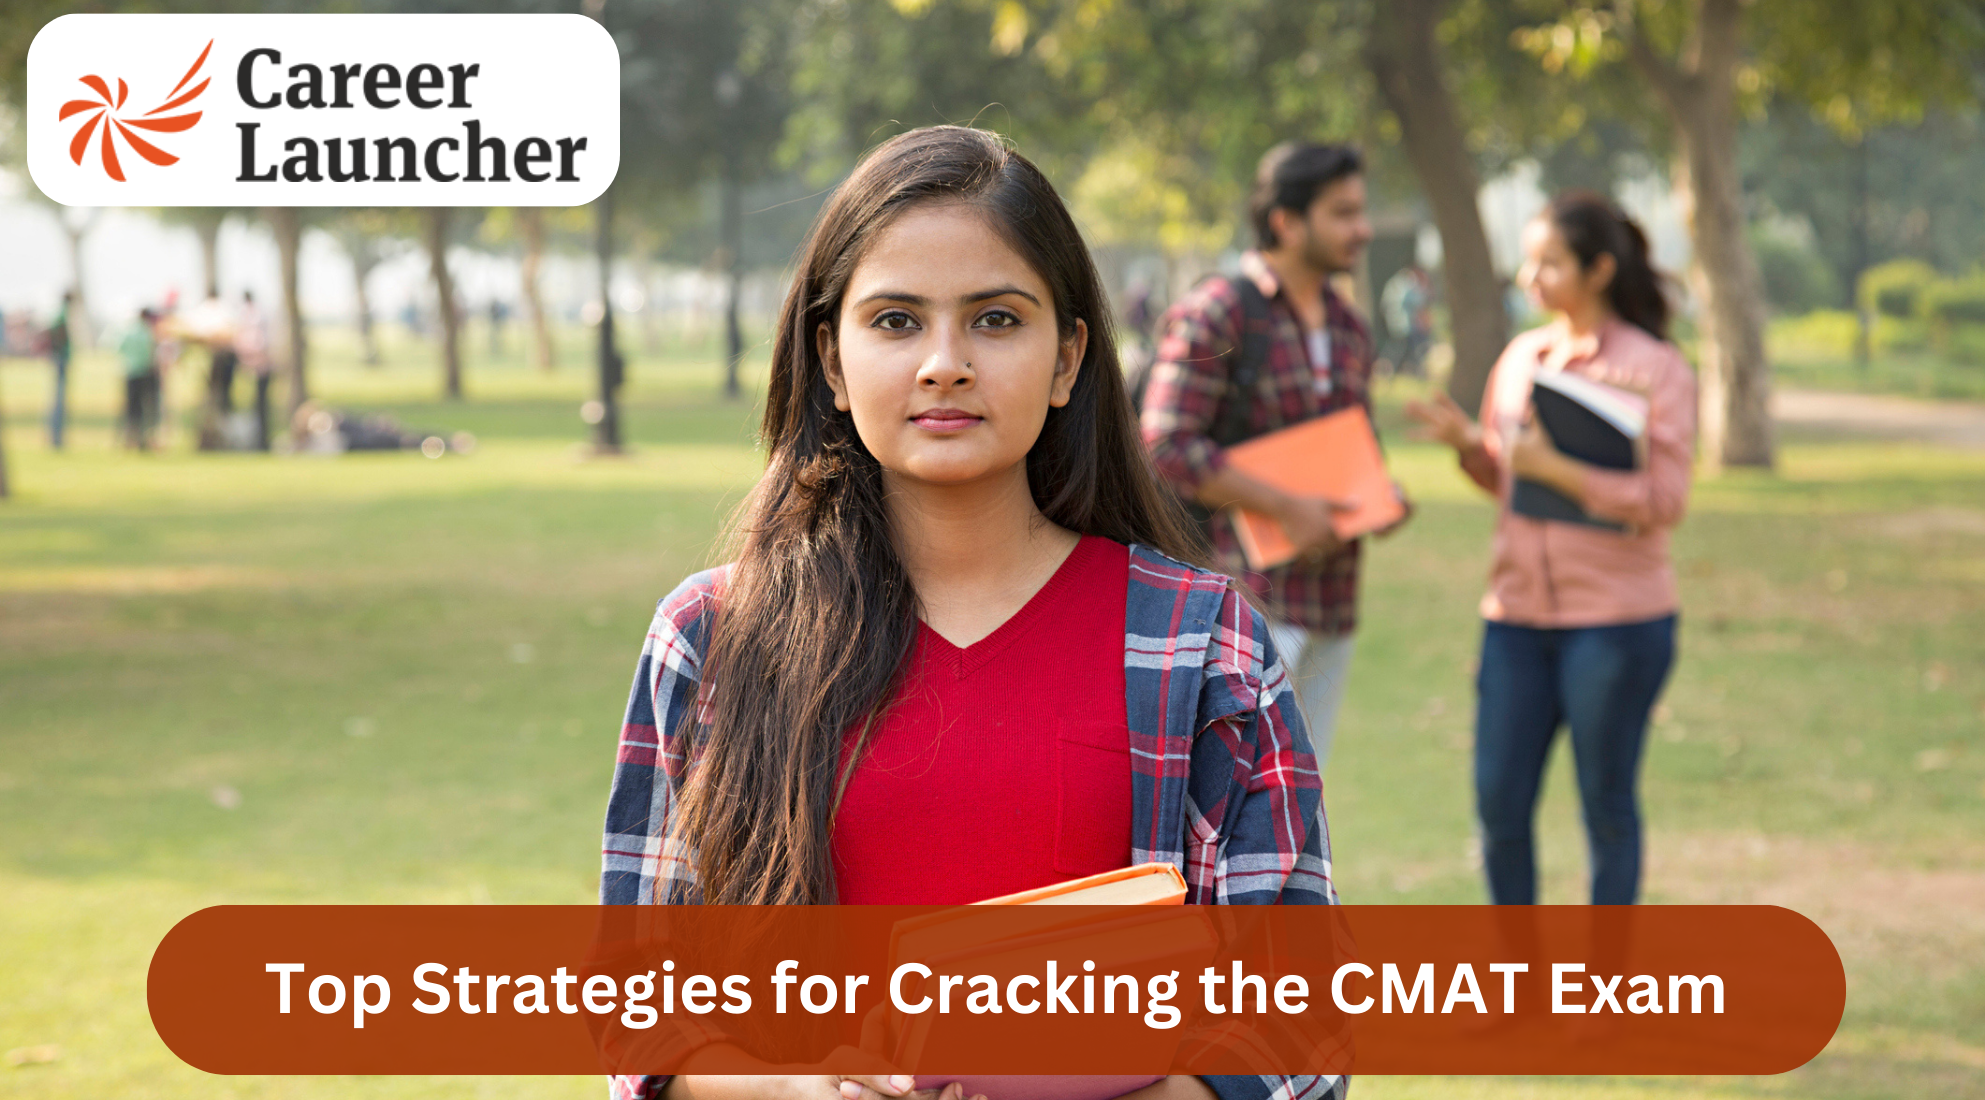 Top Strategies for Cracking the CMAT Exam